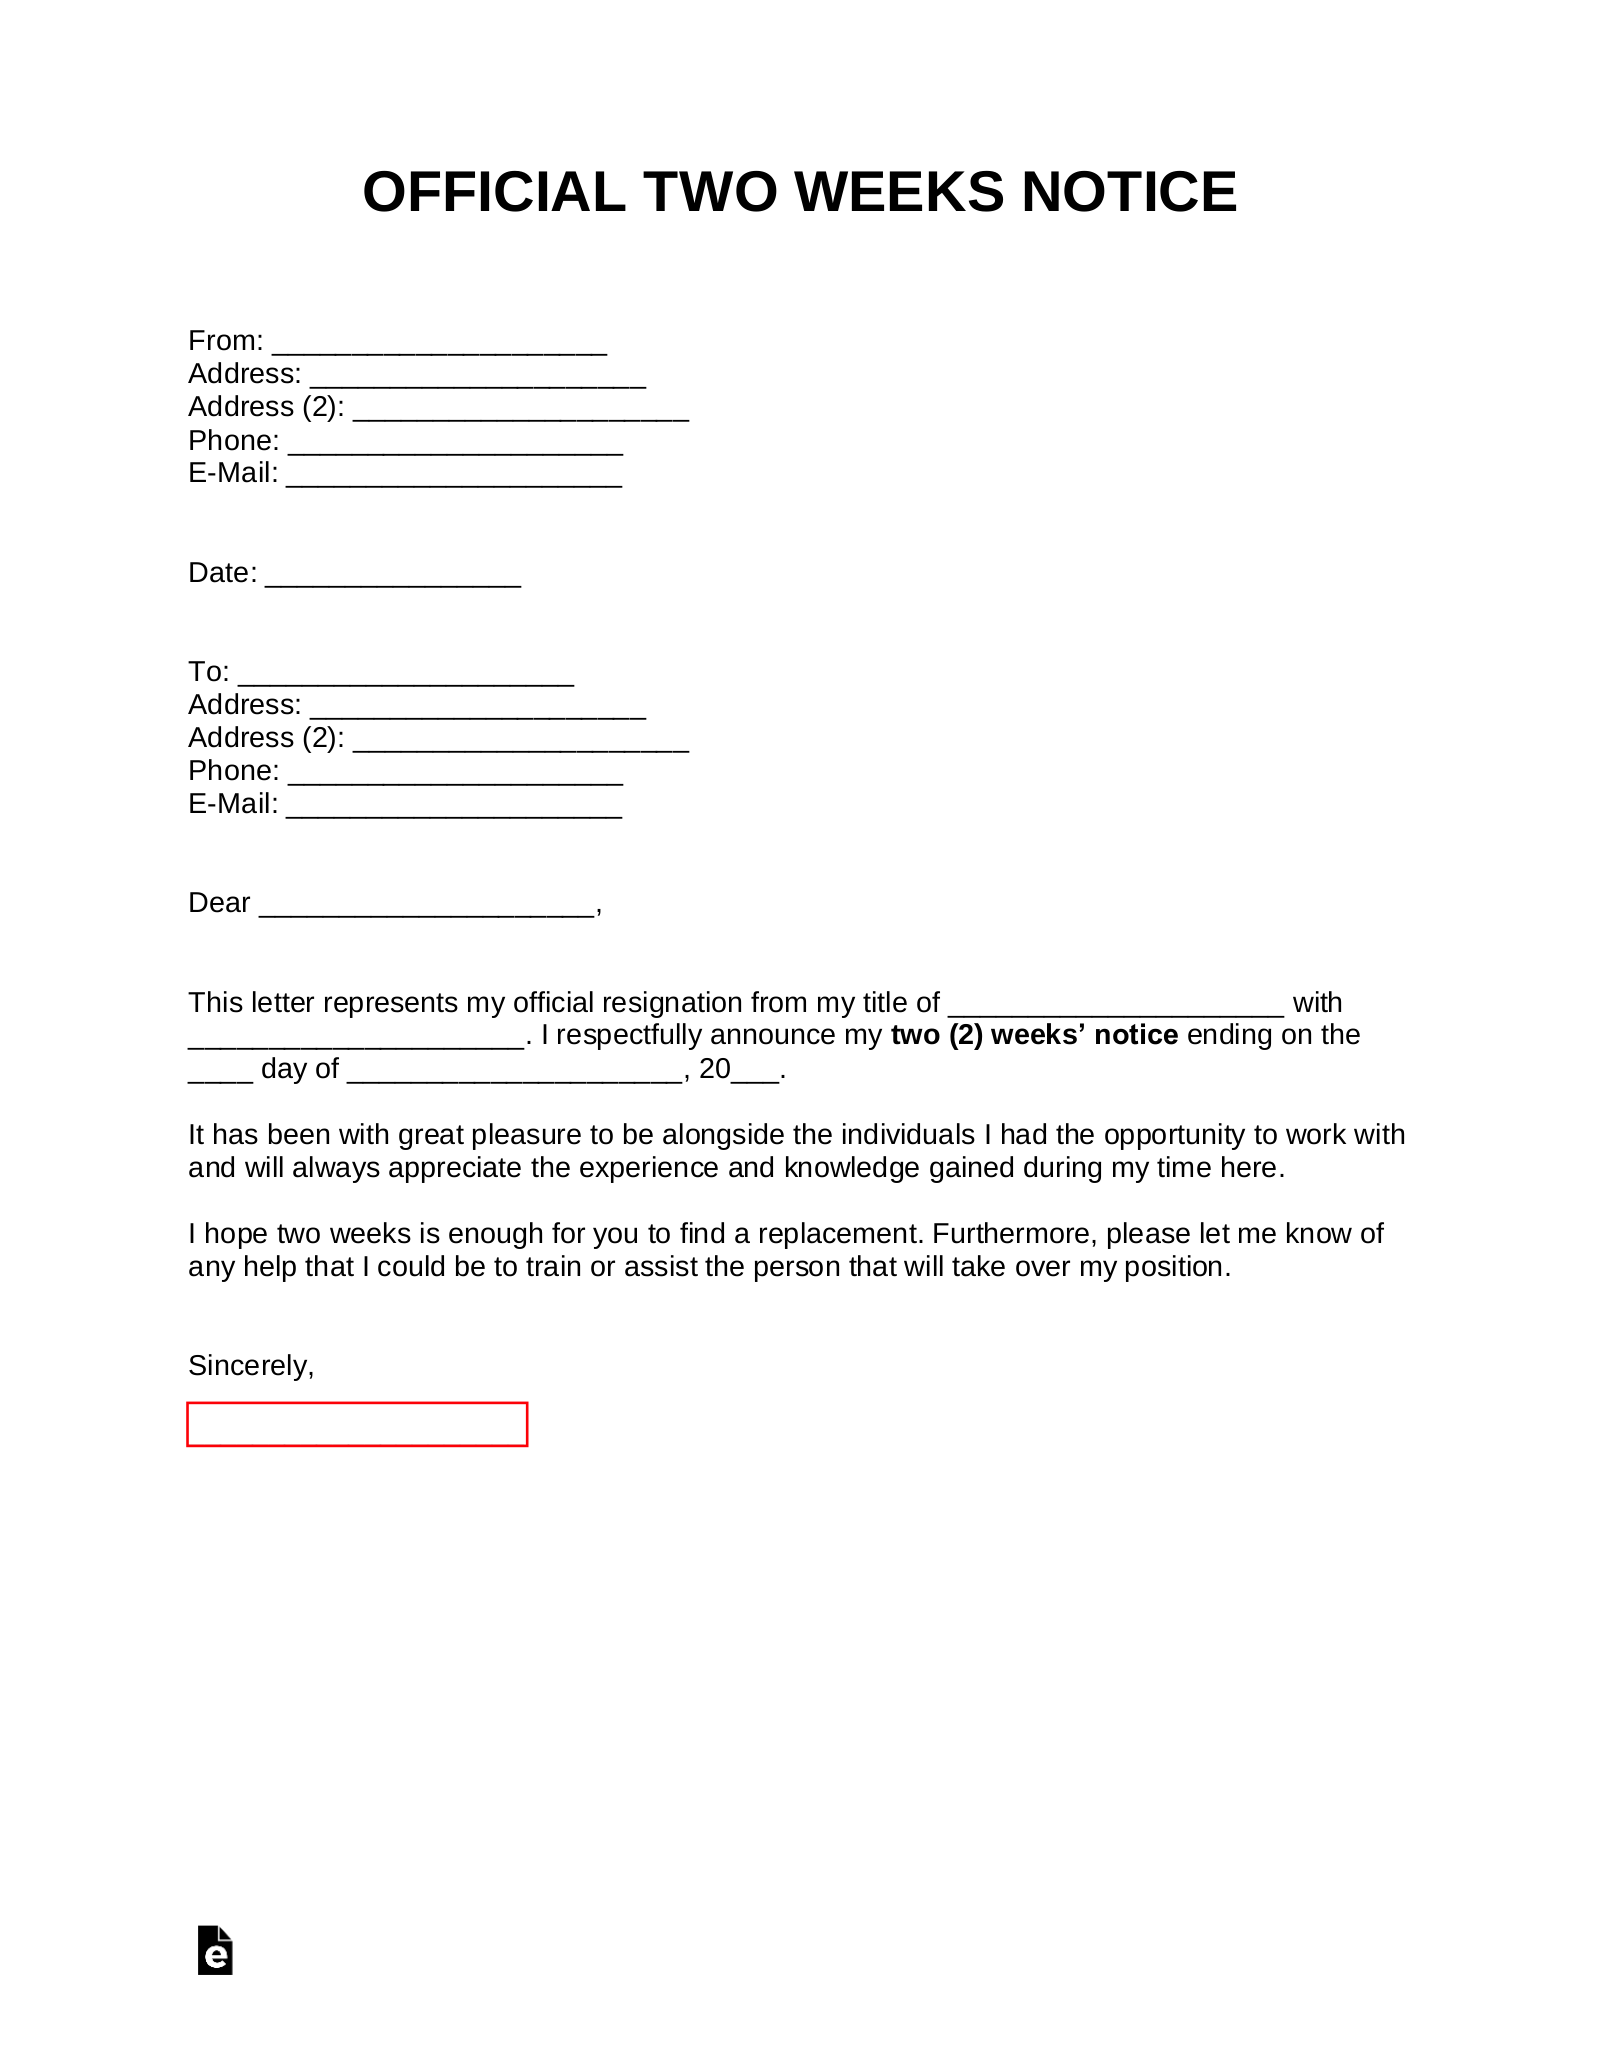 Letter Of Resignation 2 Weeks Notice Template from eforms.com